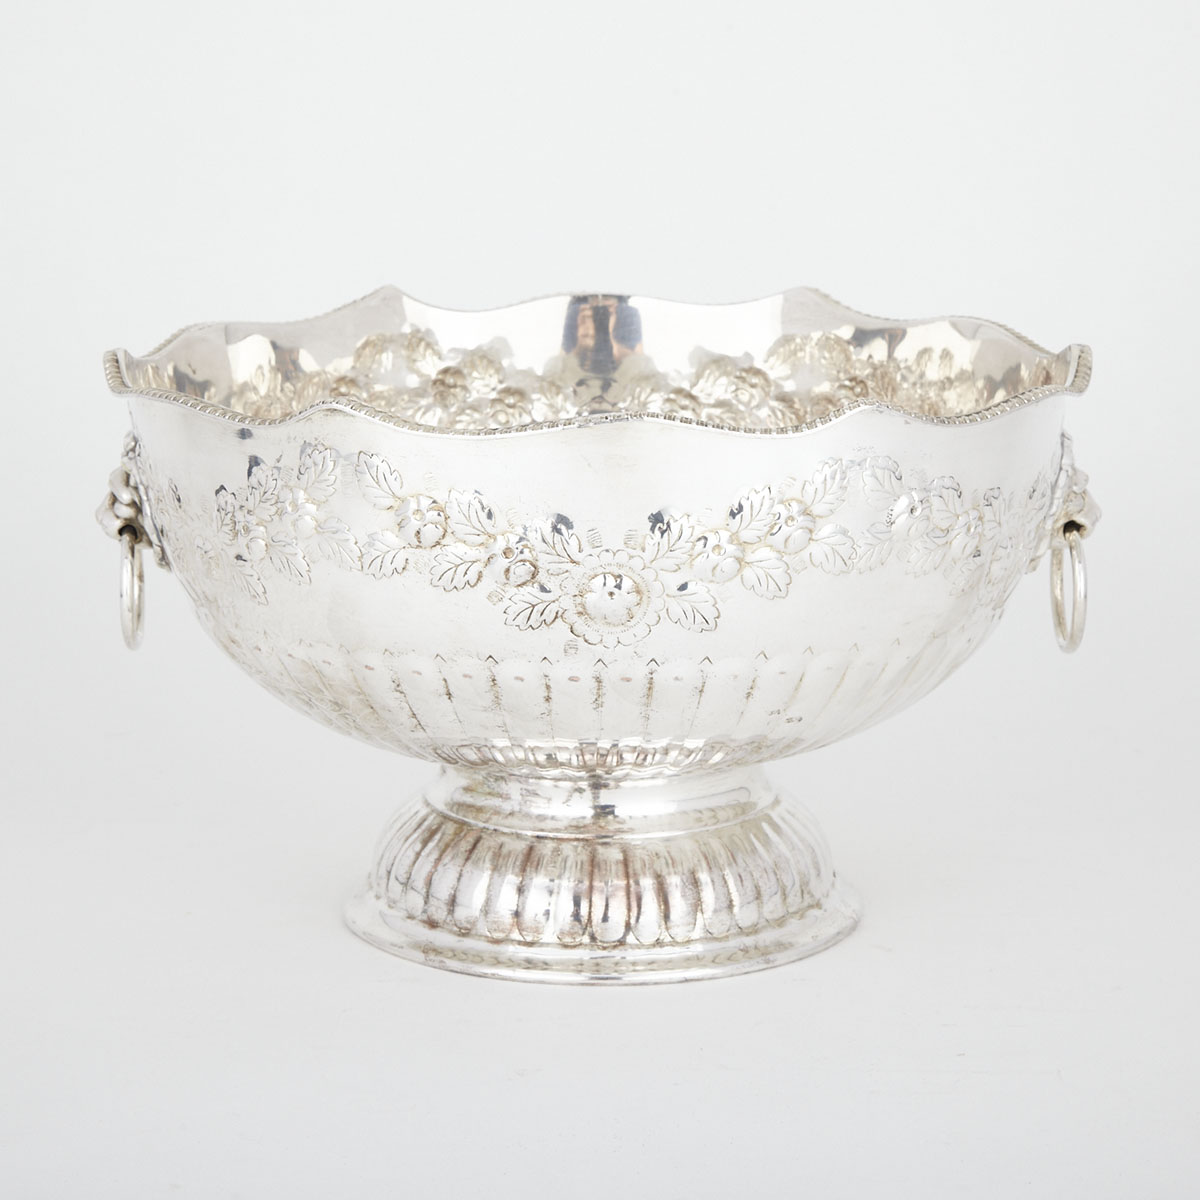 English Silver Plated Punch Bowl, 20th century